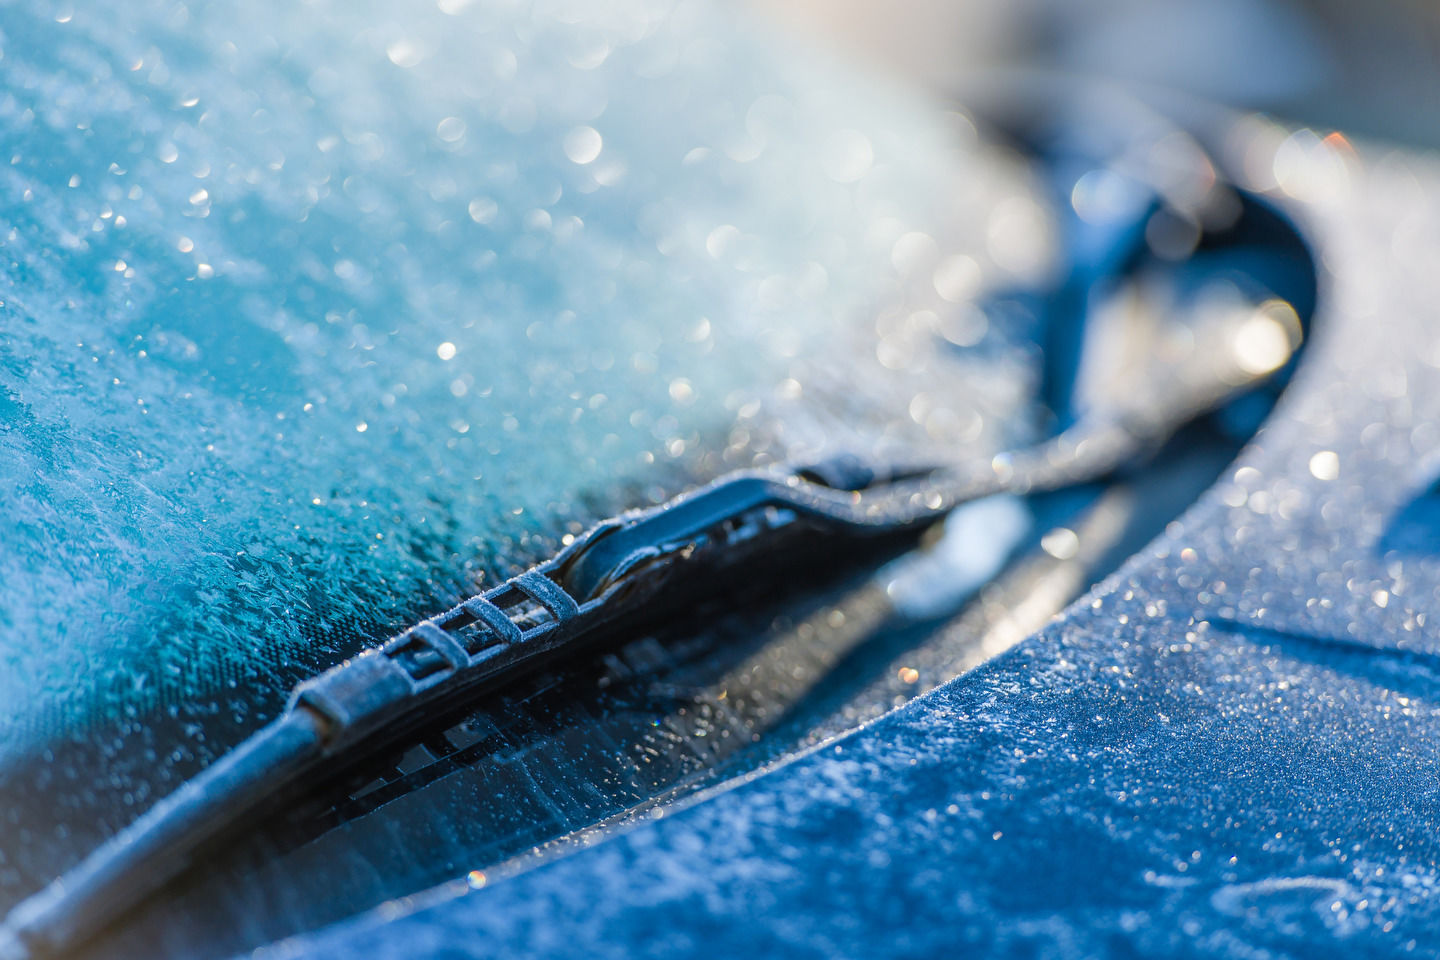 The best accessories to protect your Toyota this winter